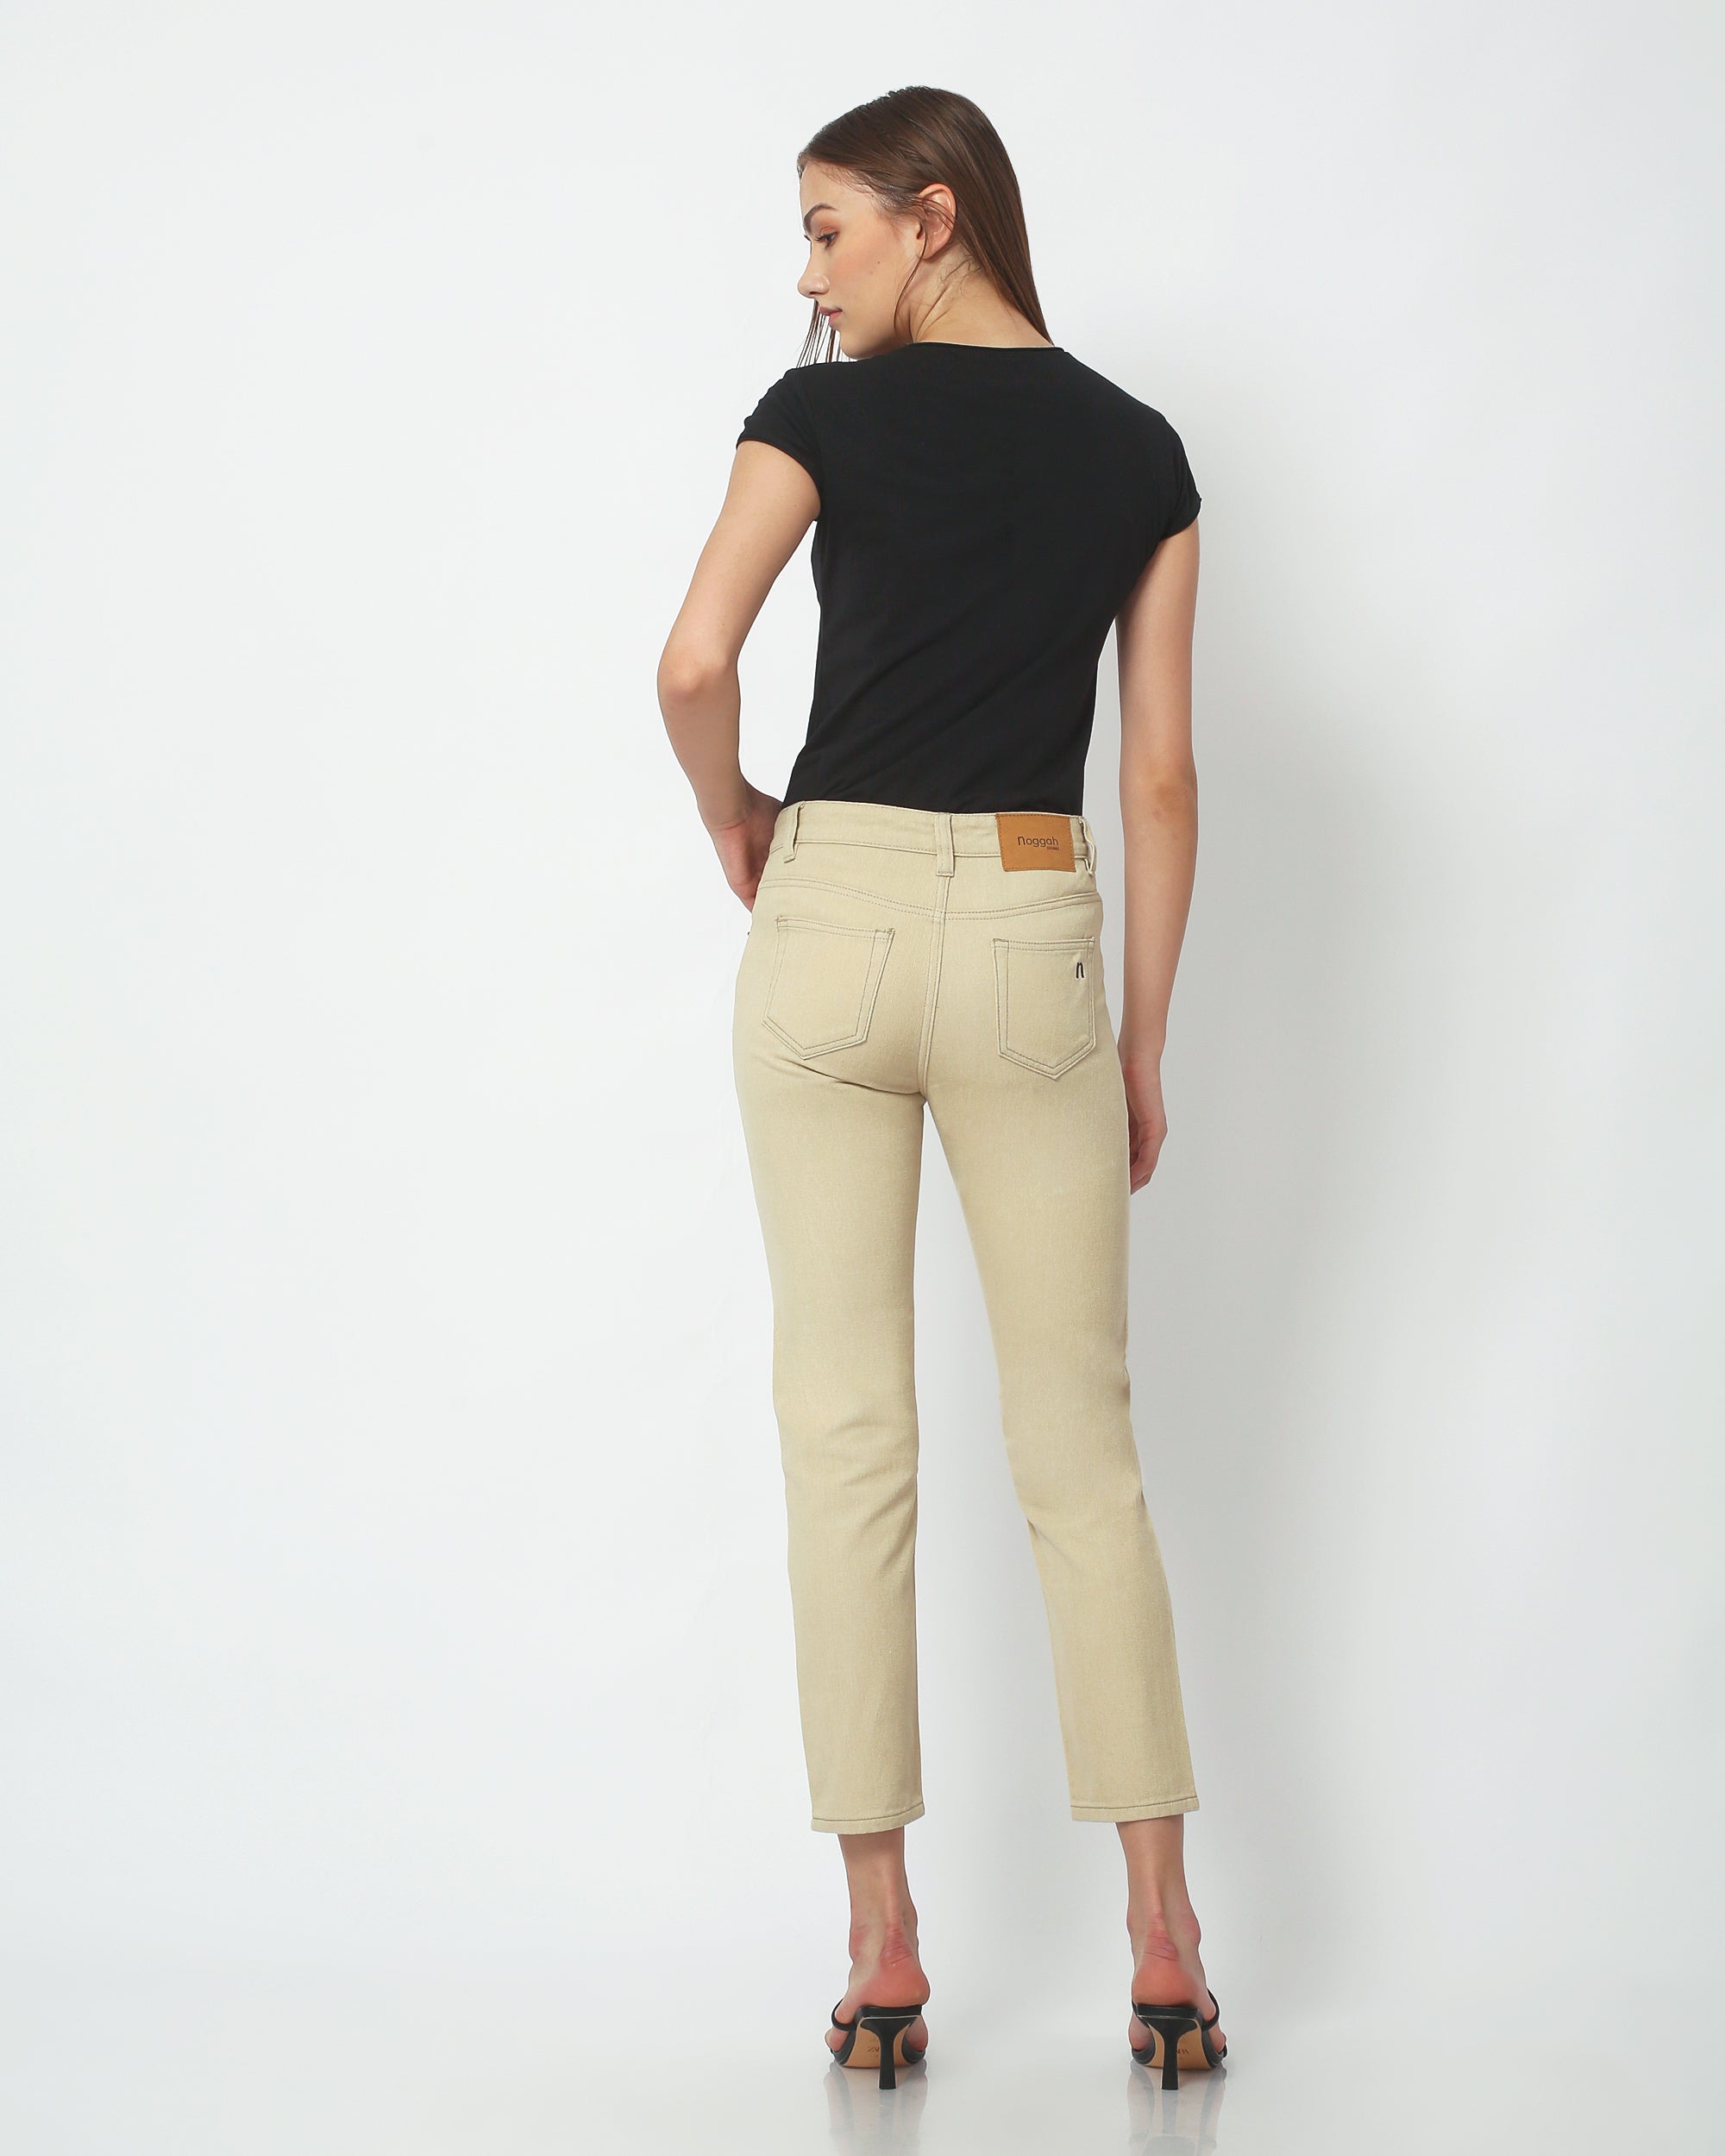 Marble Women's Jeans | Tan 2400 130 – The Boutique Waltham